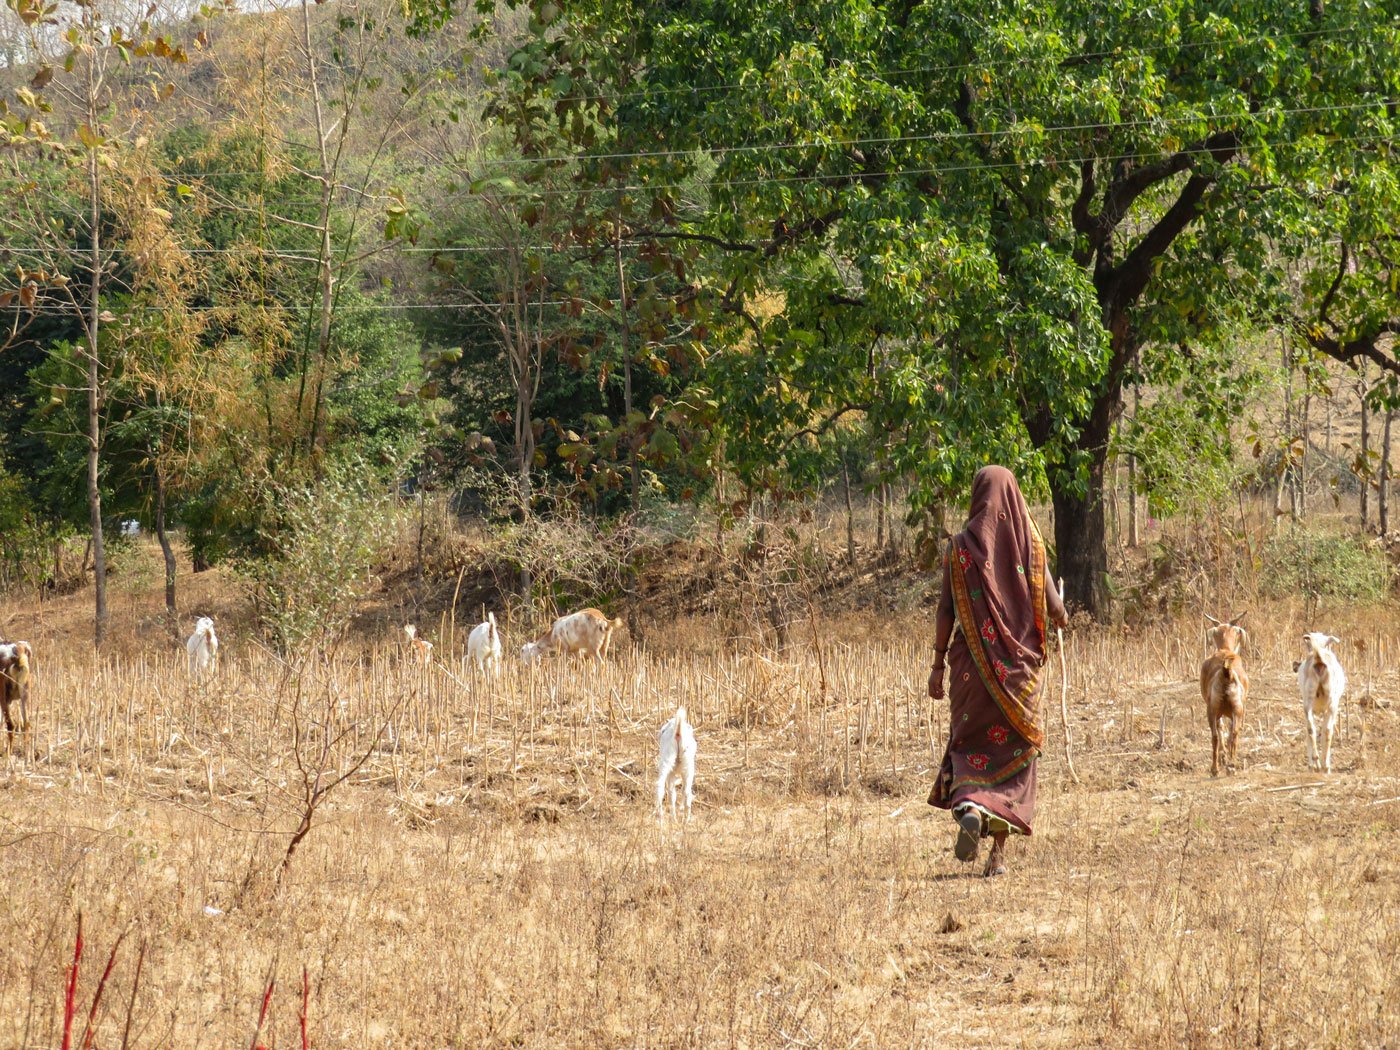 When Shevanta Tadvi is out grazing her 12 goats near the forest in Maharajapada hamlet, she is free from taunts of being 'barren' 

